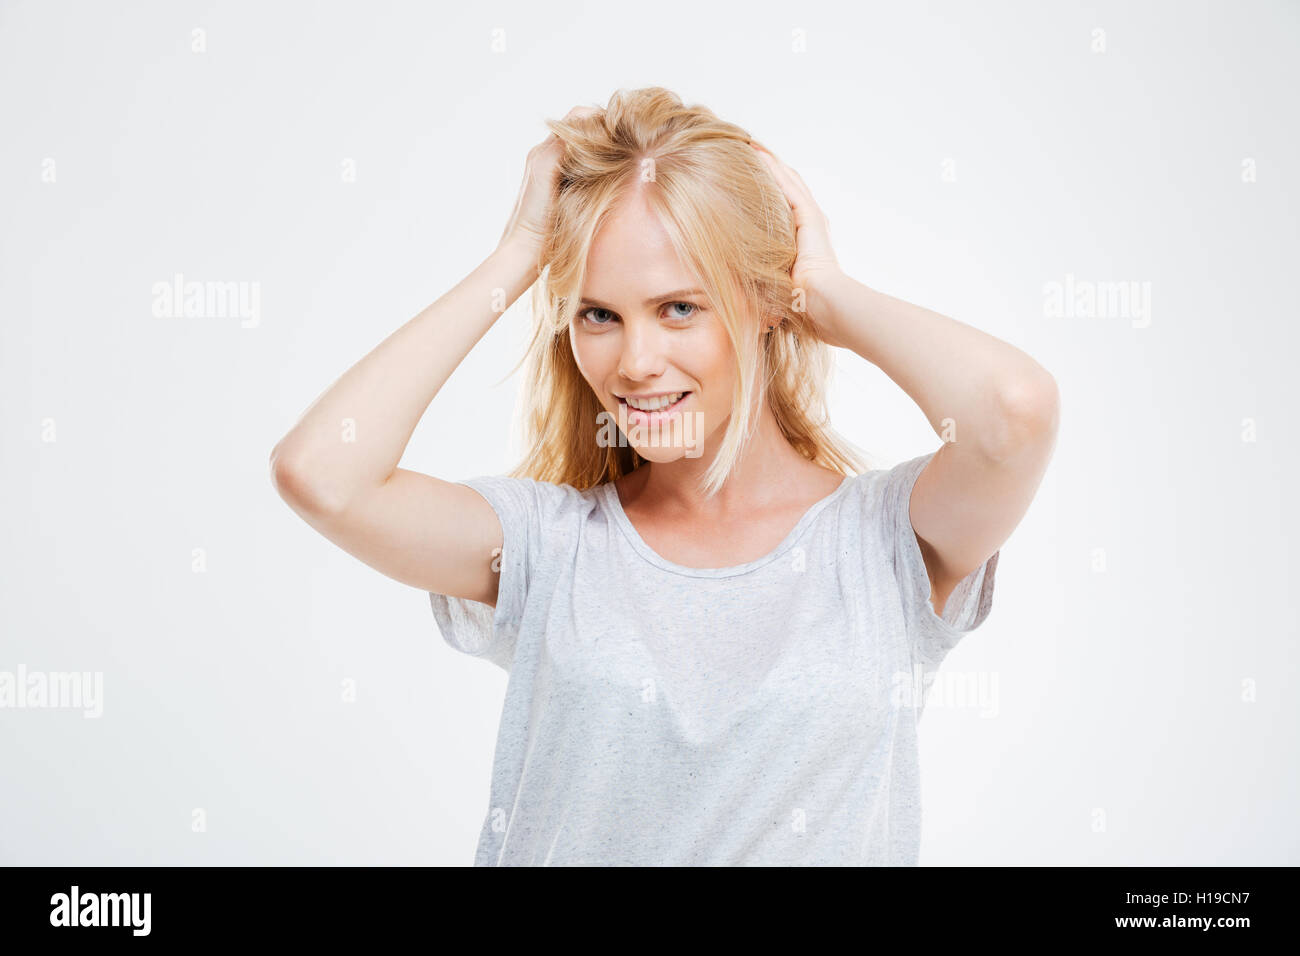 Portrait of happy beautiful young woman with blonde hair over white background Stock Photo